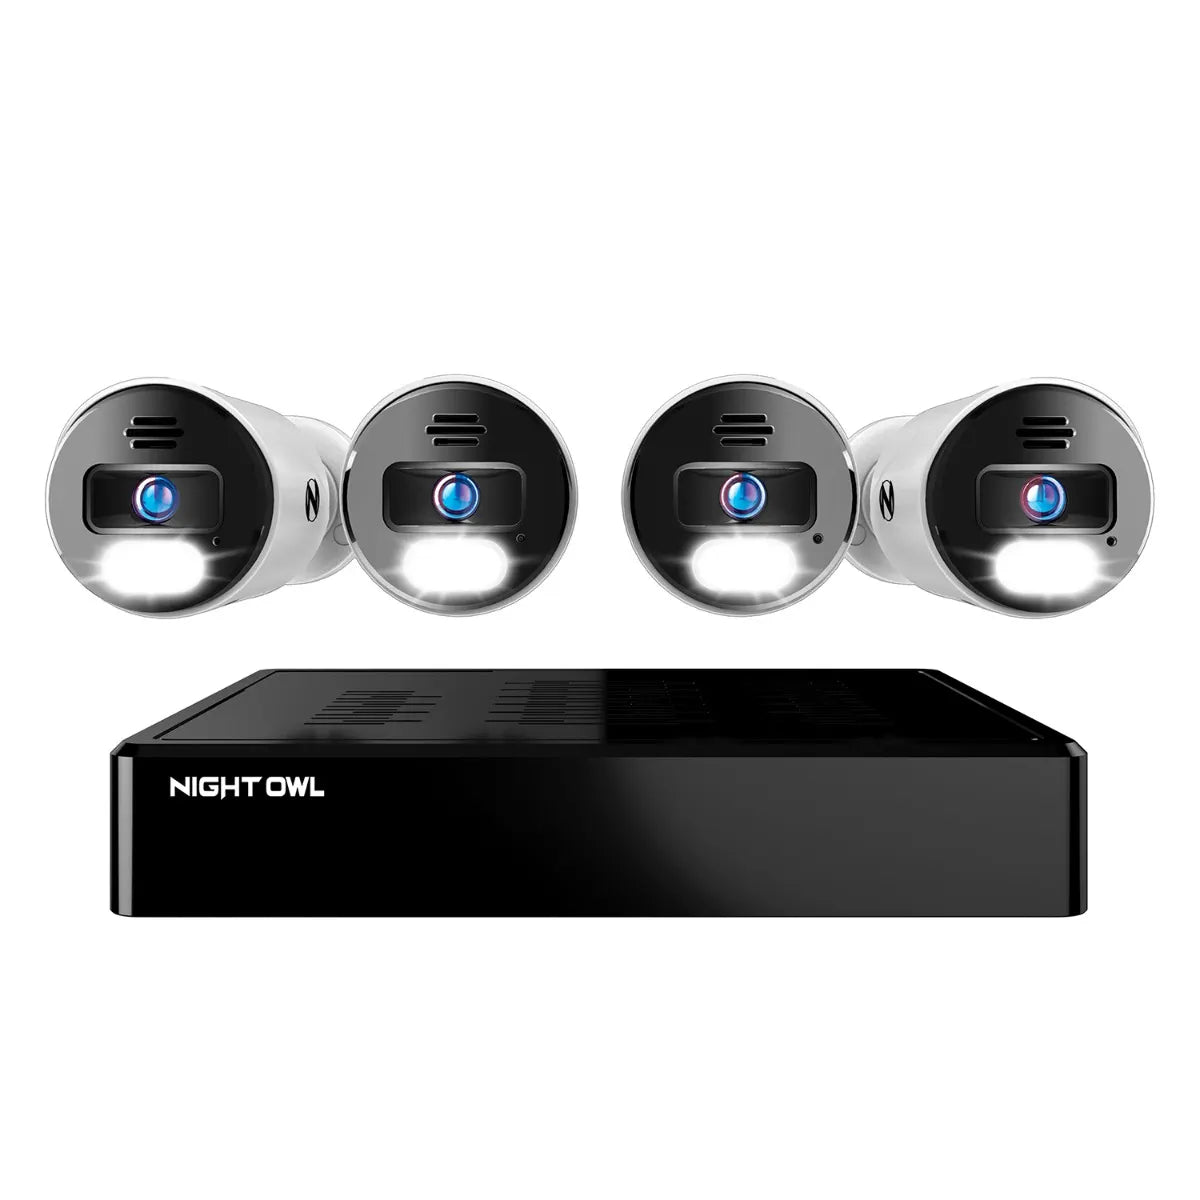 NVR Security System